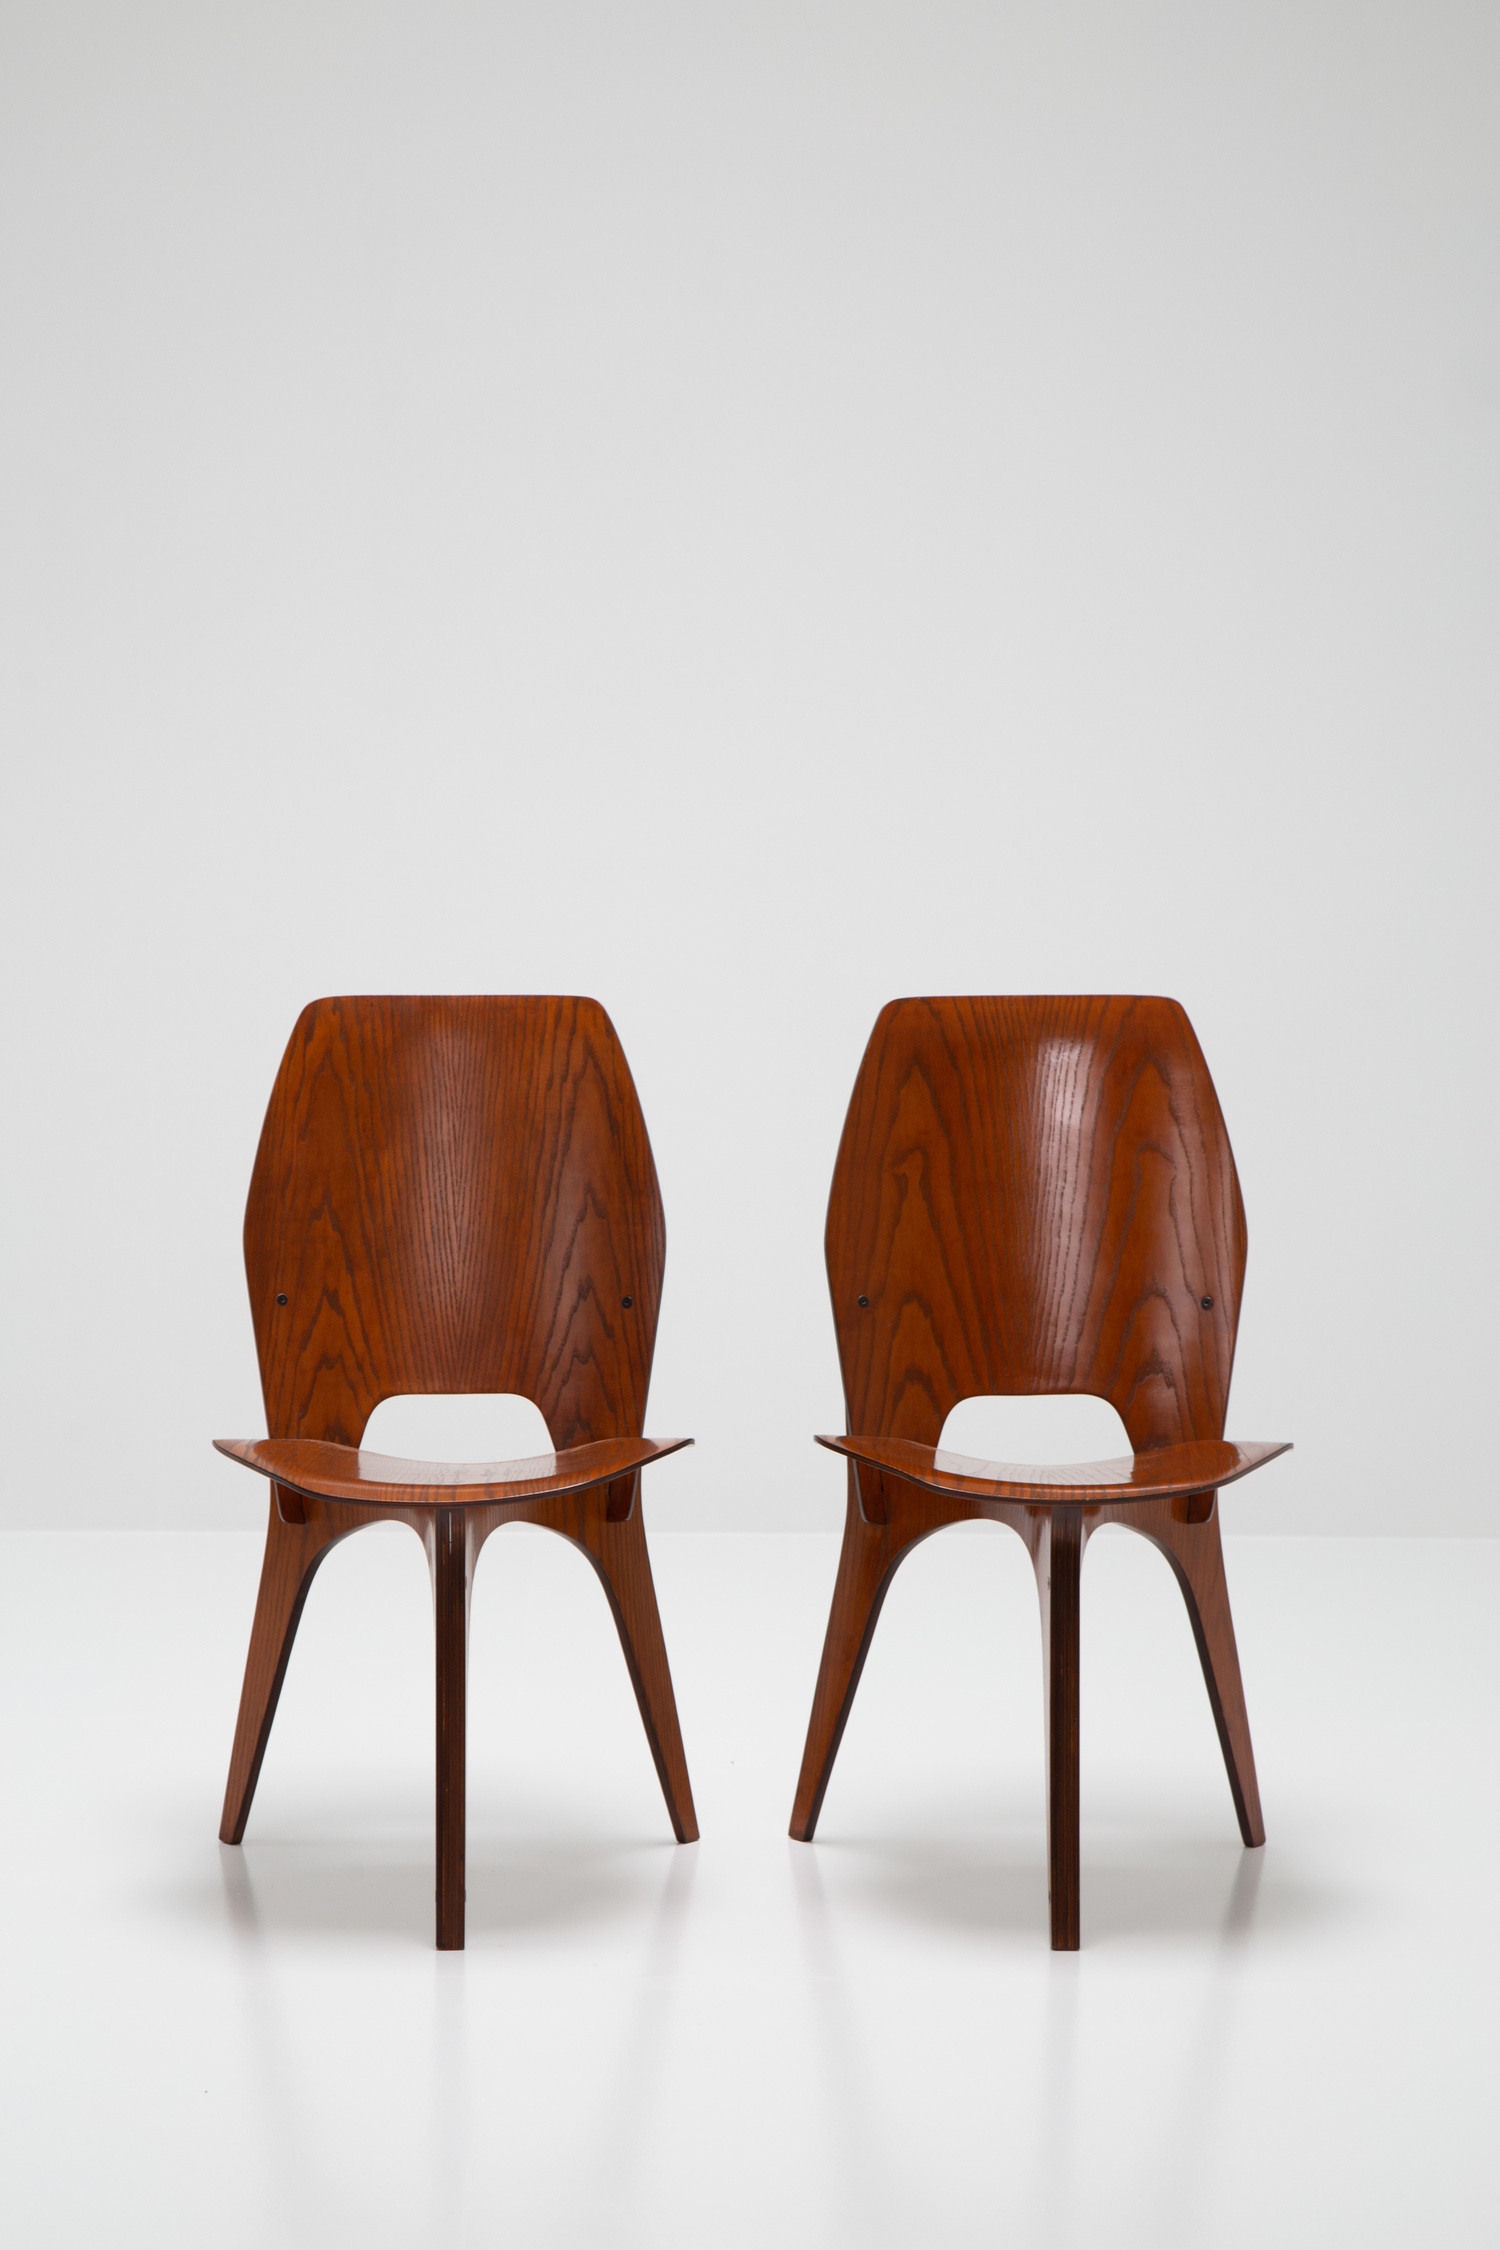 Pair of chairs by Eugenio Gerli for Tecno